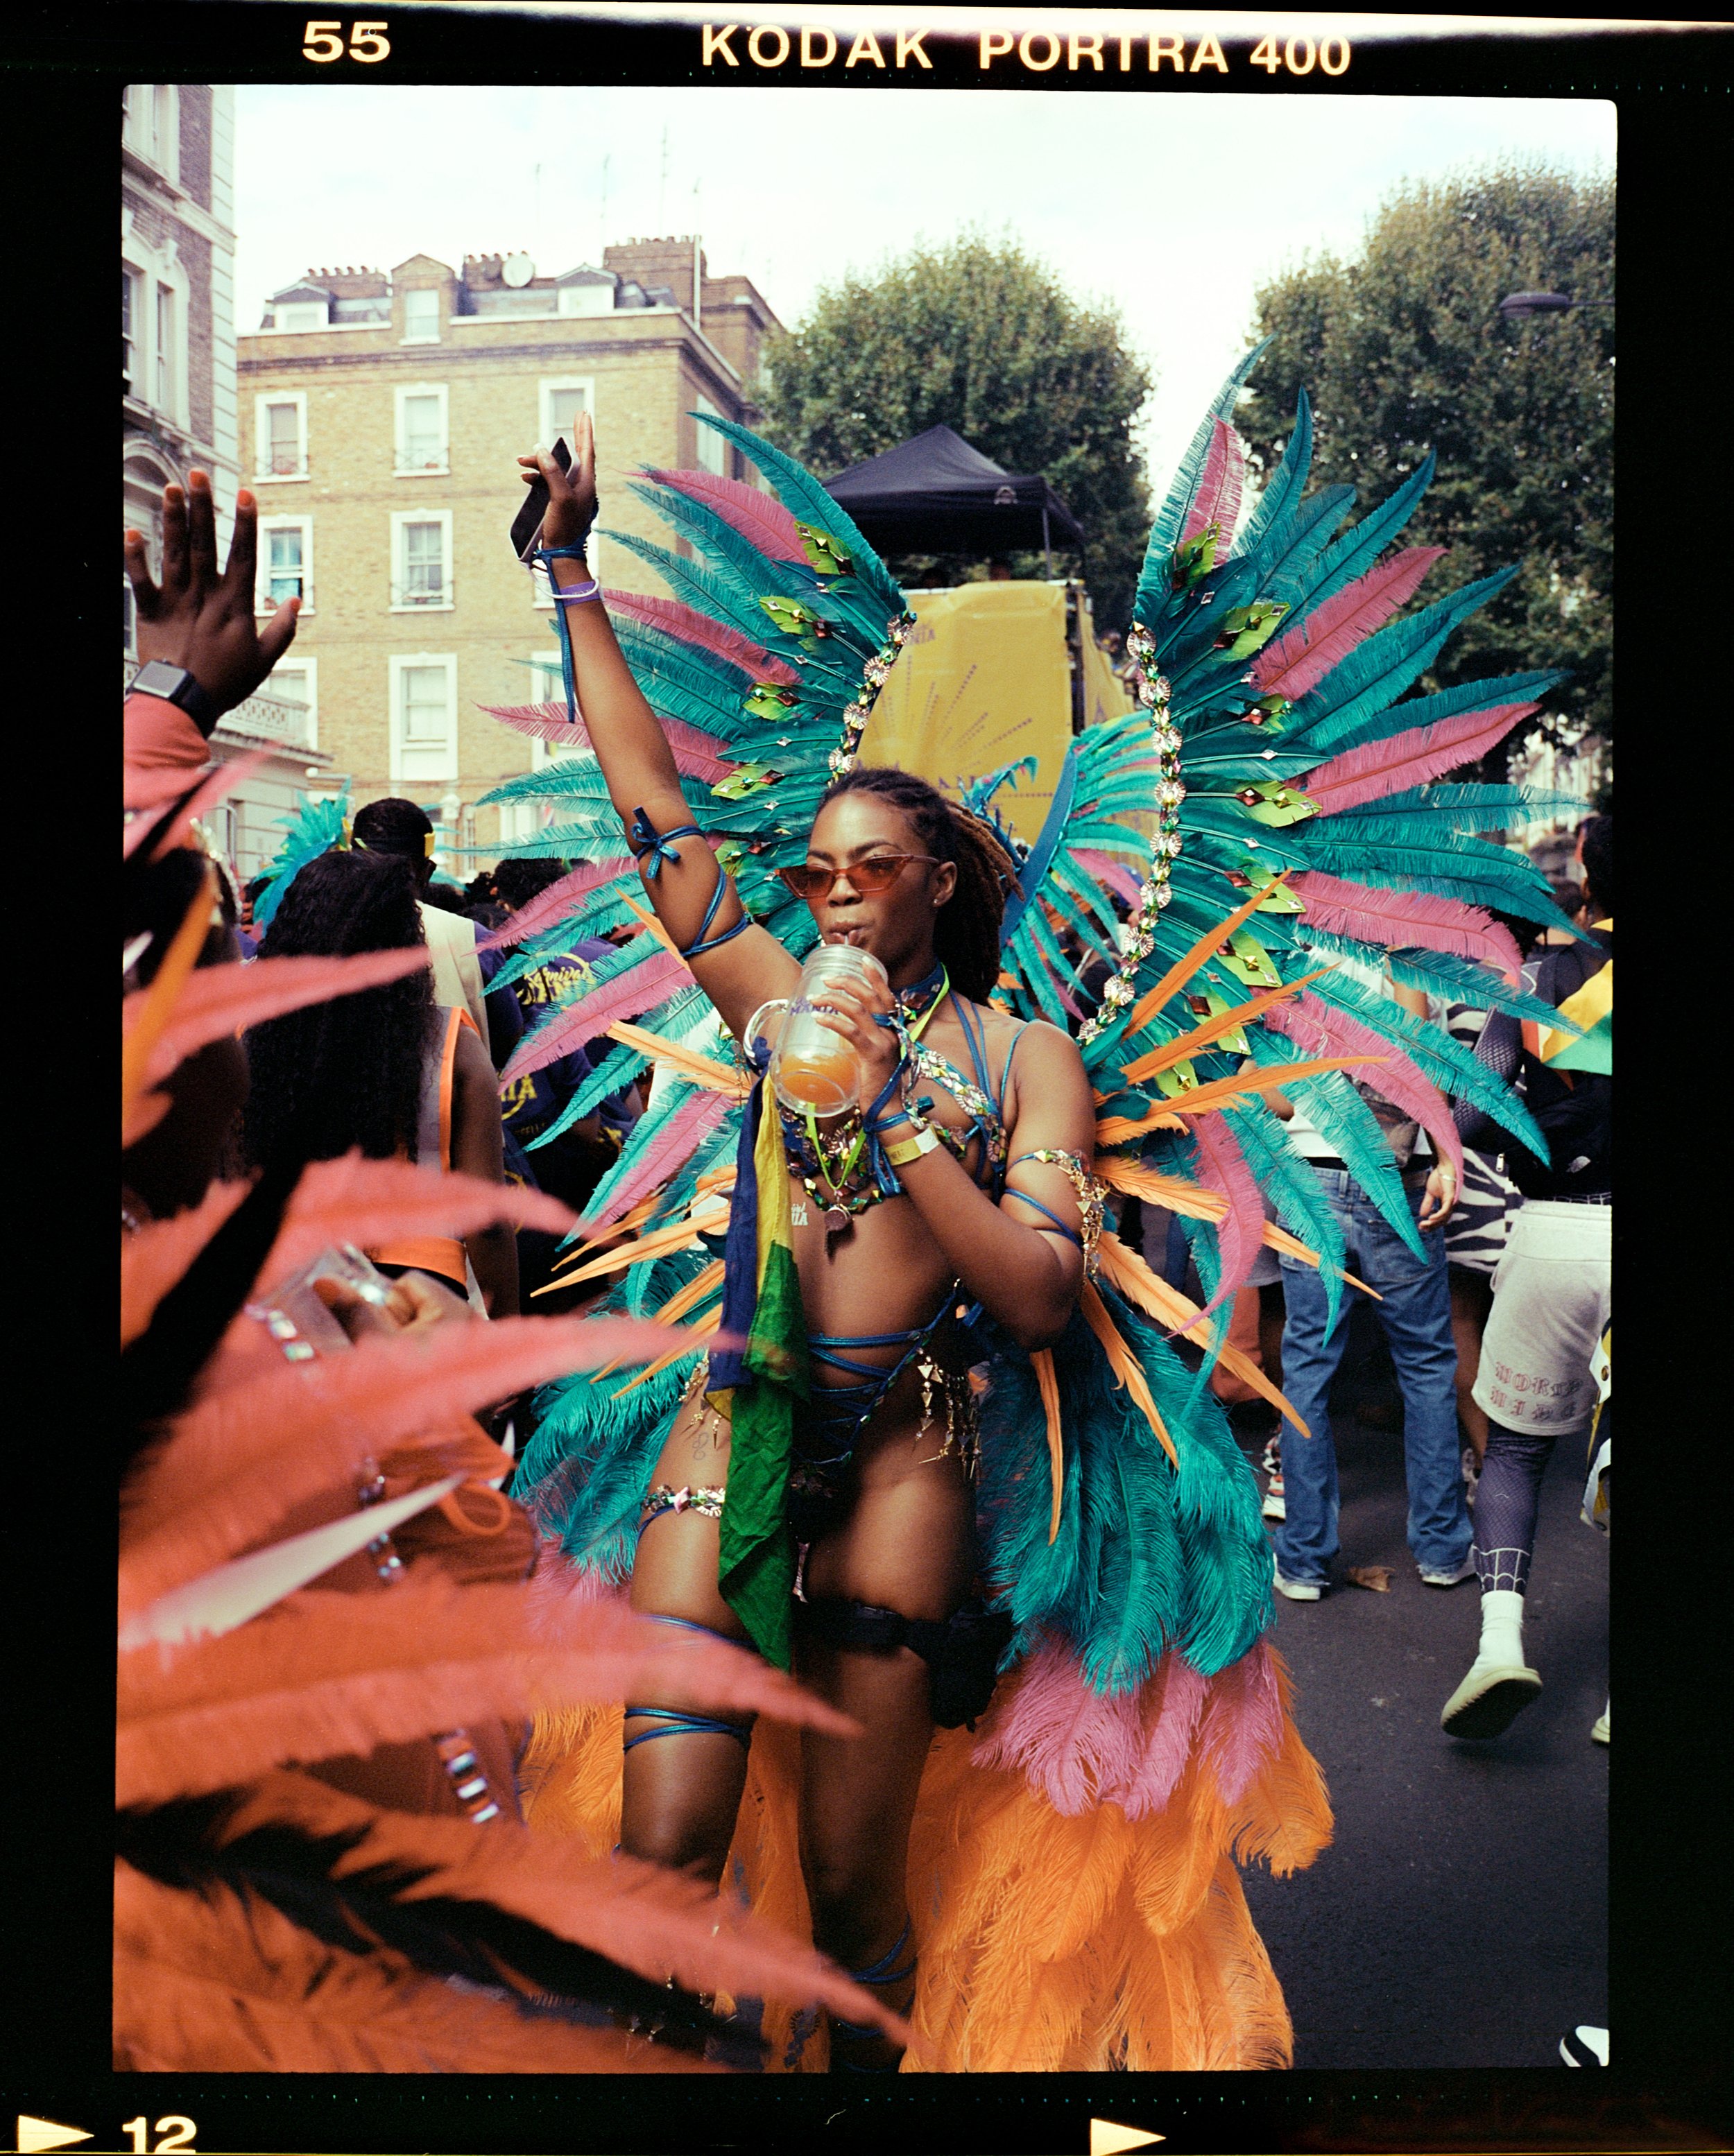 Carnival 23 Day Two - SAUL - DAD - JPEGS Edited by Marcus Hessenberg Photography London--33.jpg